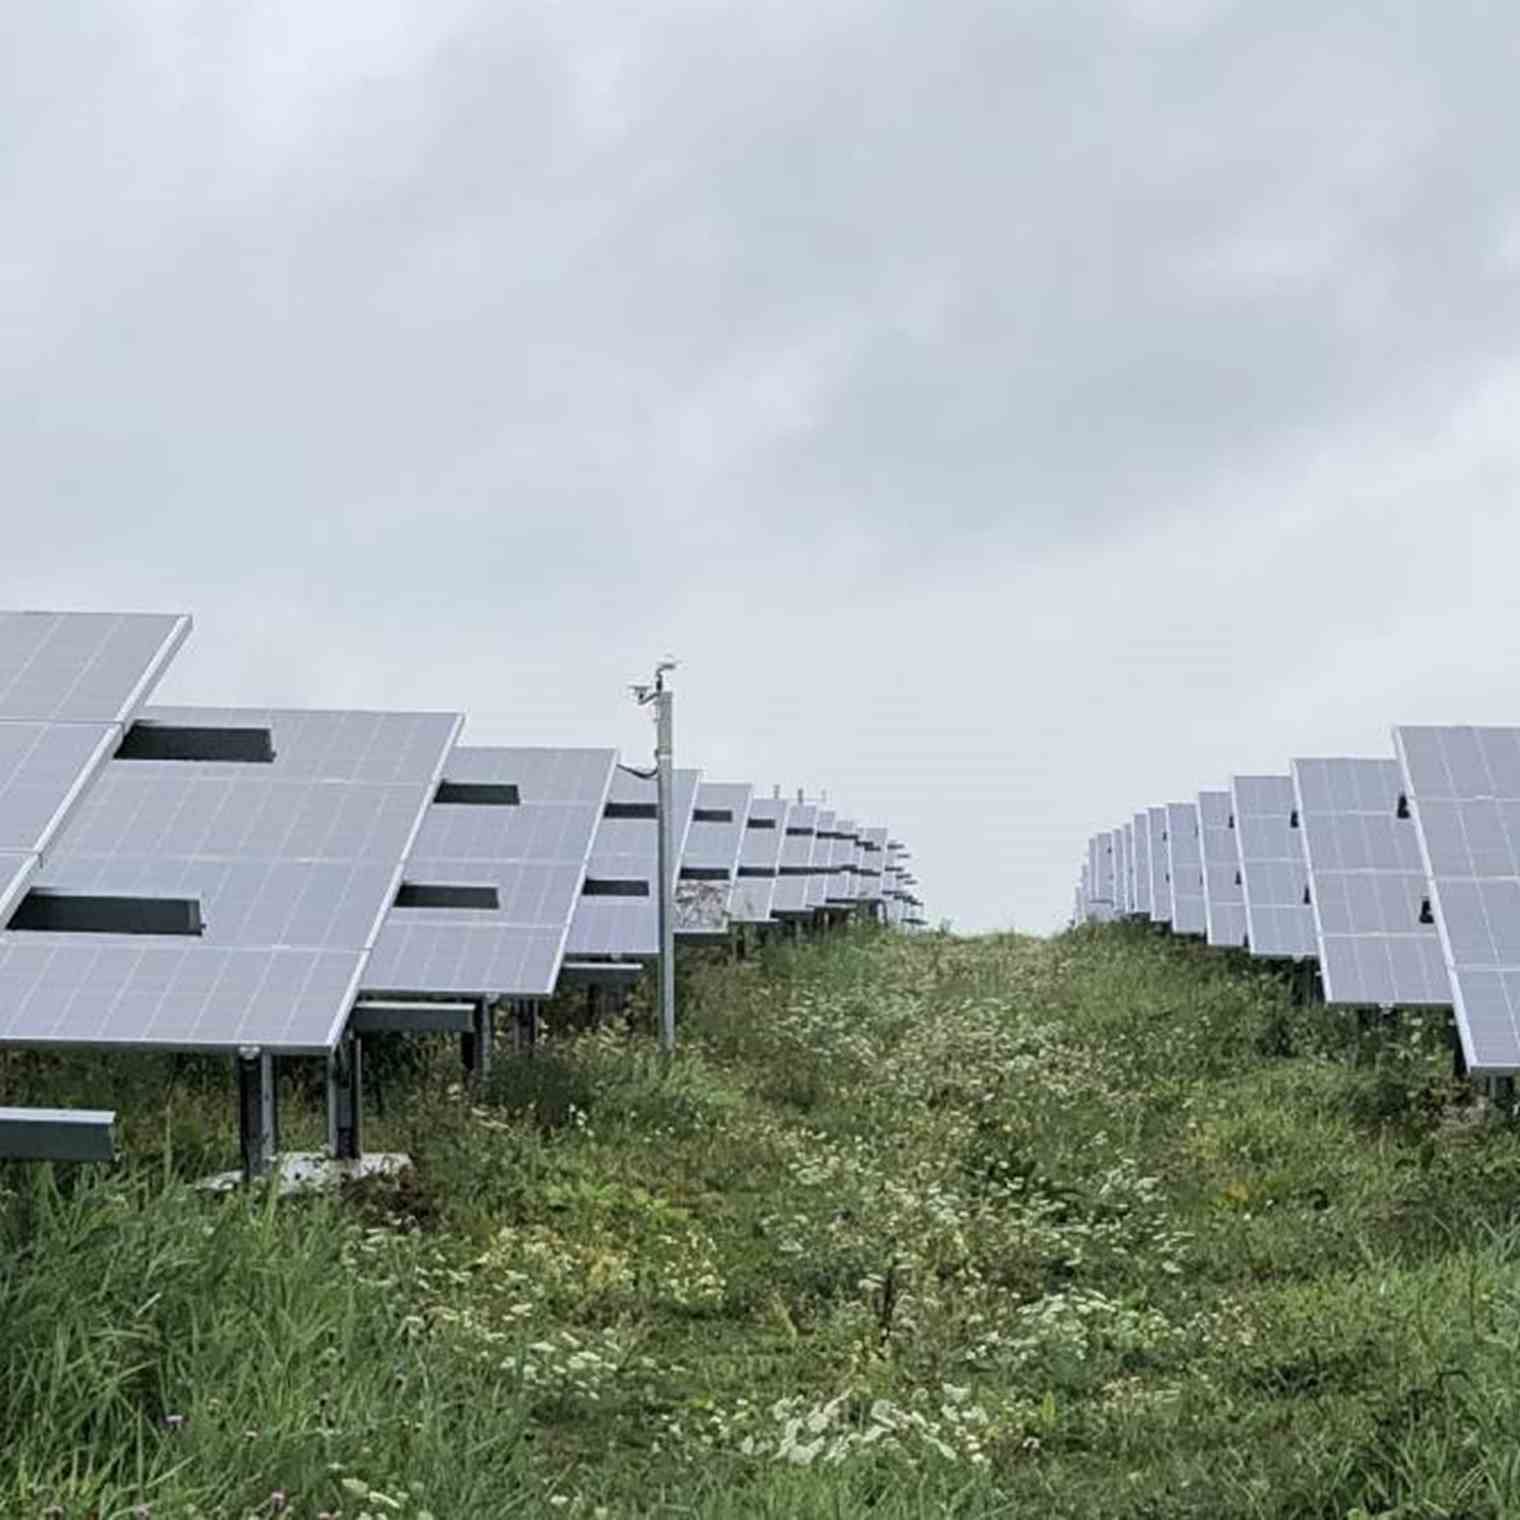 Solar farm with focus on spatial quality, biodiversity and multiple land use